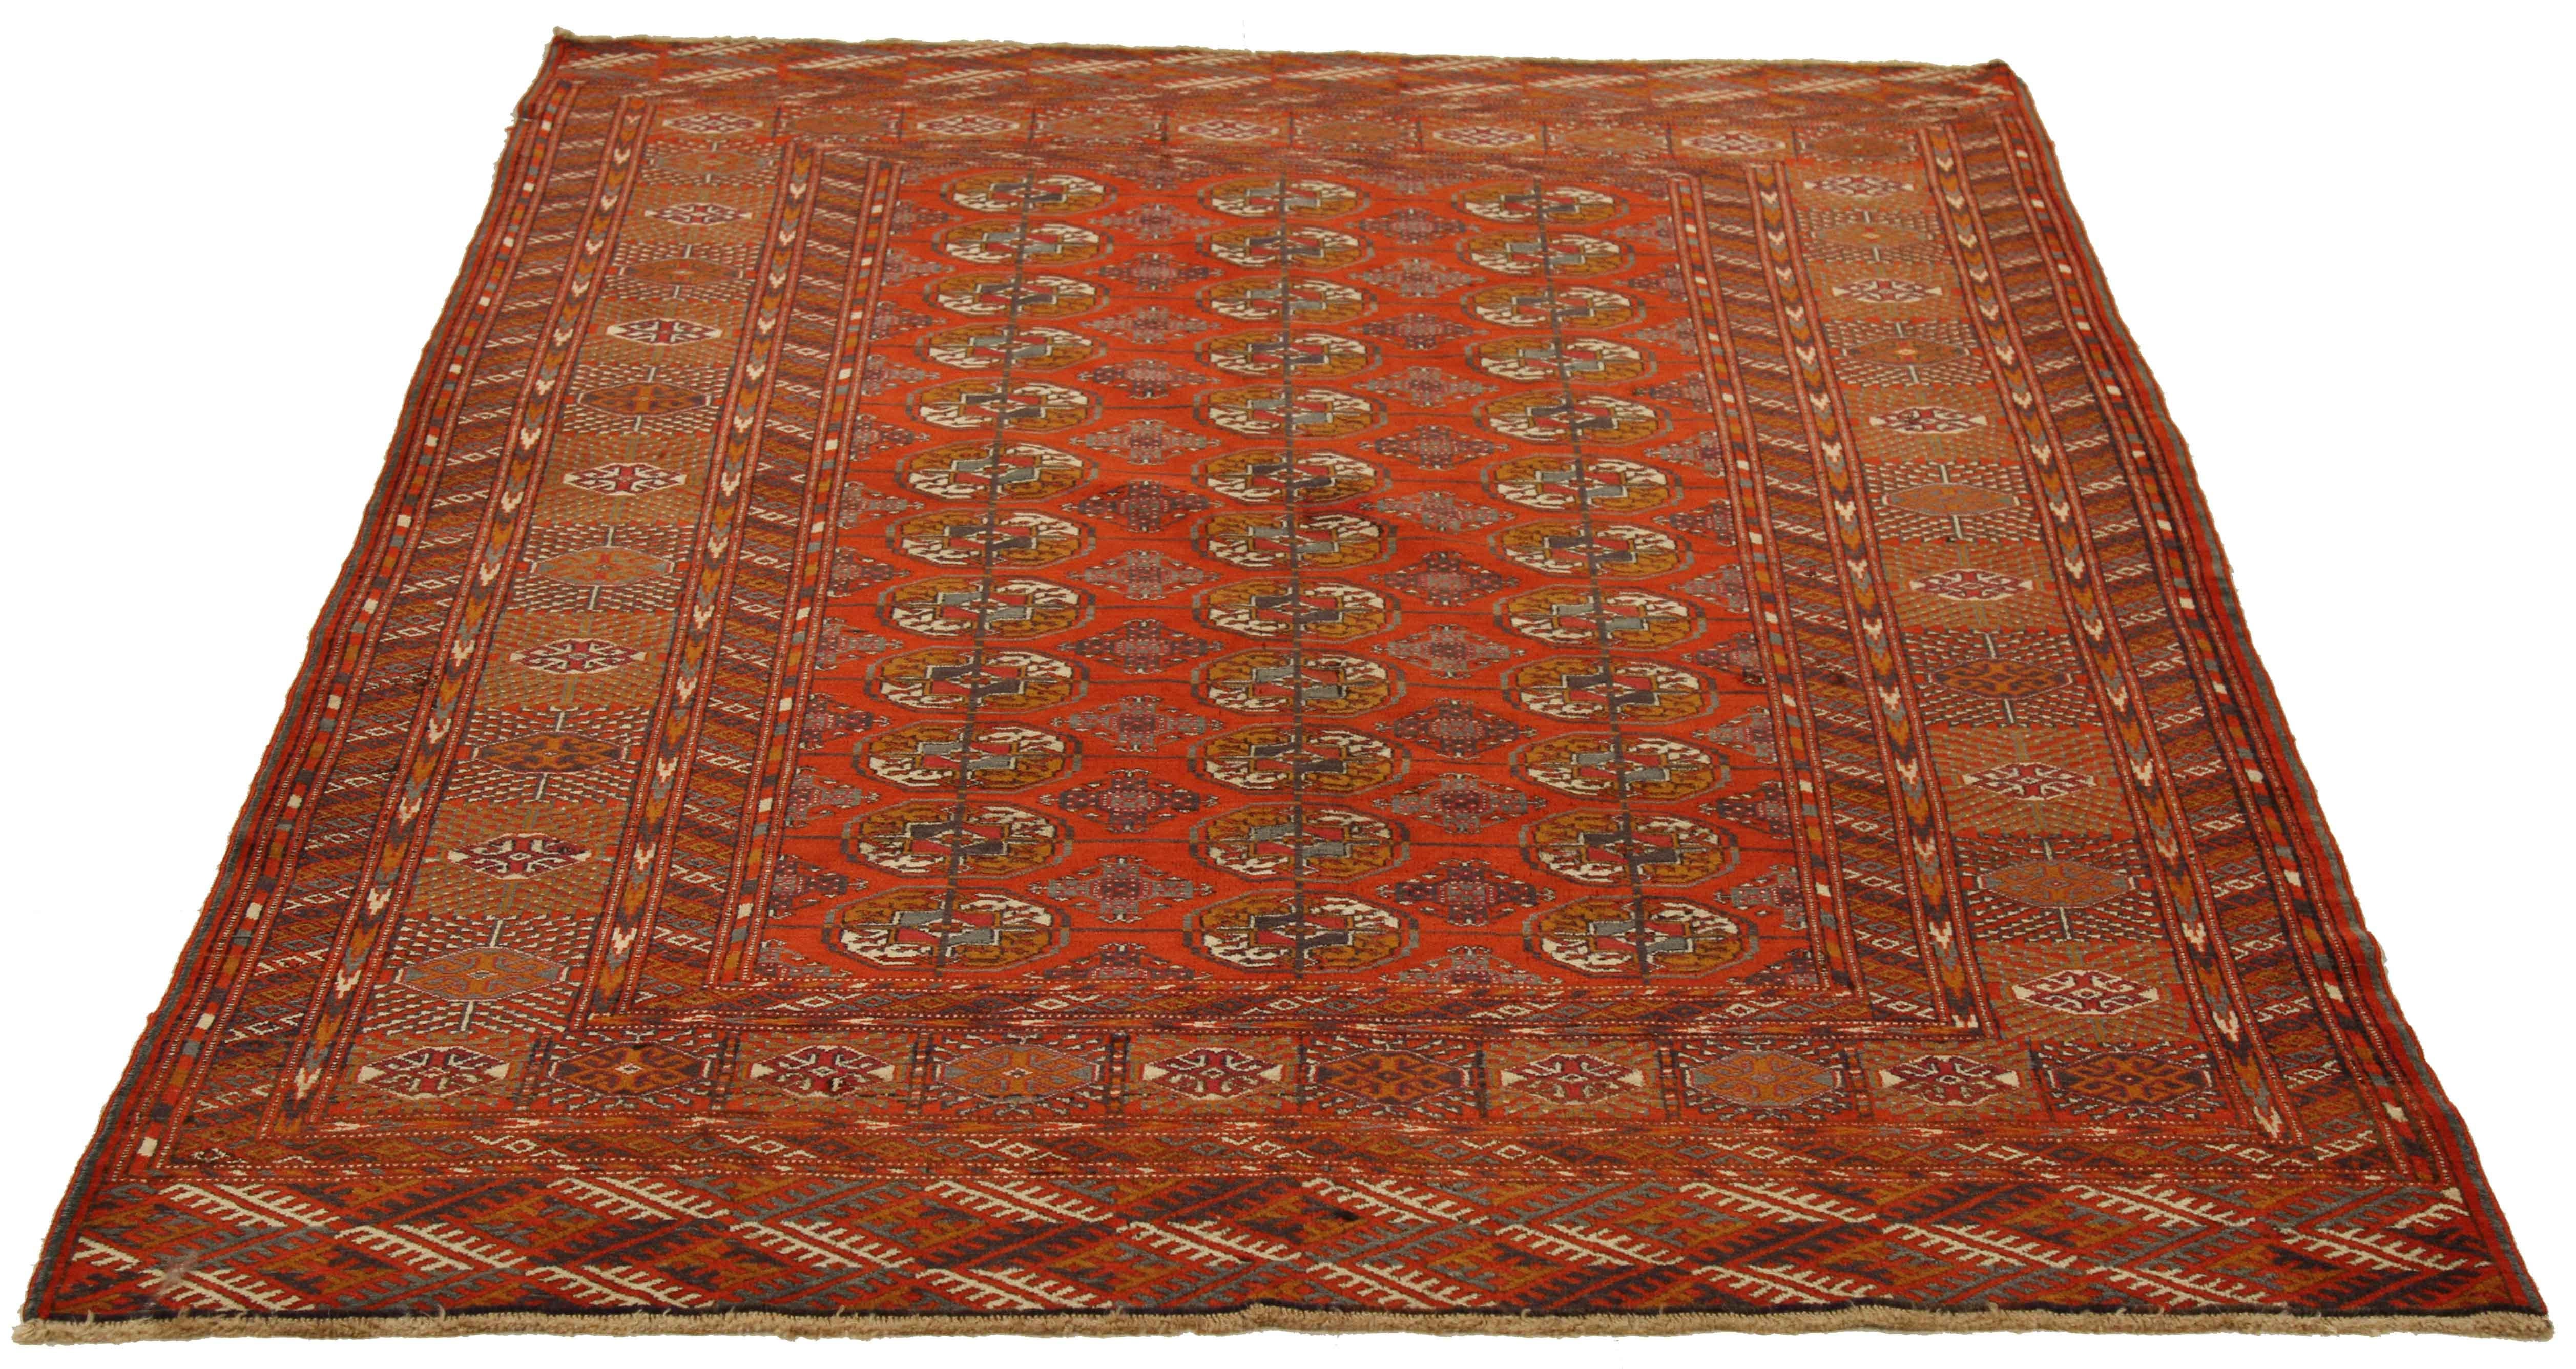 Antique Persian rug handwoven from the finest sheep’s wool and colored with all-natural vegetable dyes that are safe for humans and pets. It’s a traditional Turkmen design featuring round floral medallions in black and ivory over a deep red field.